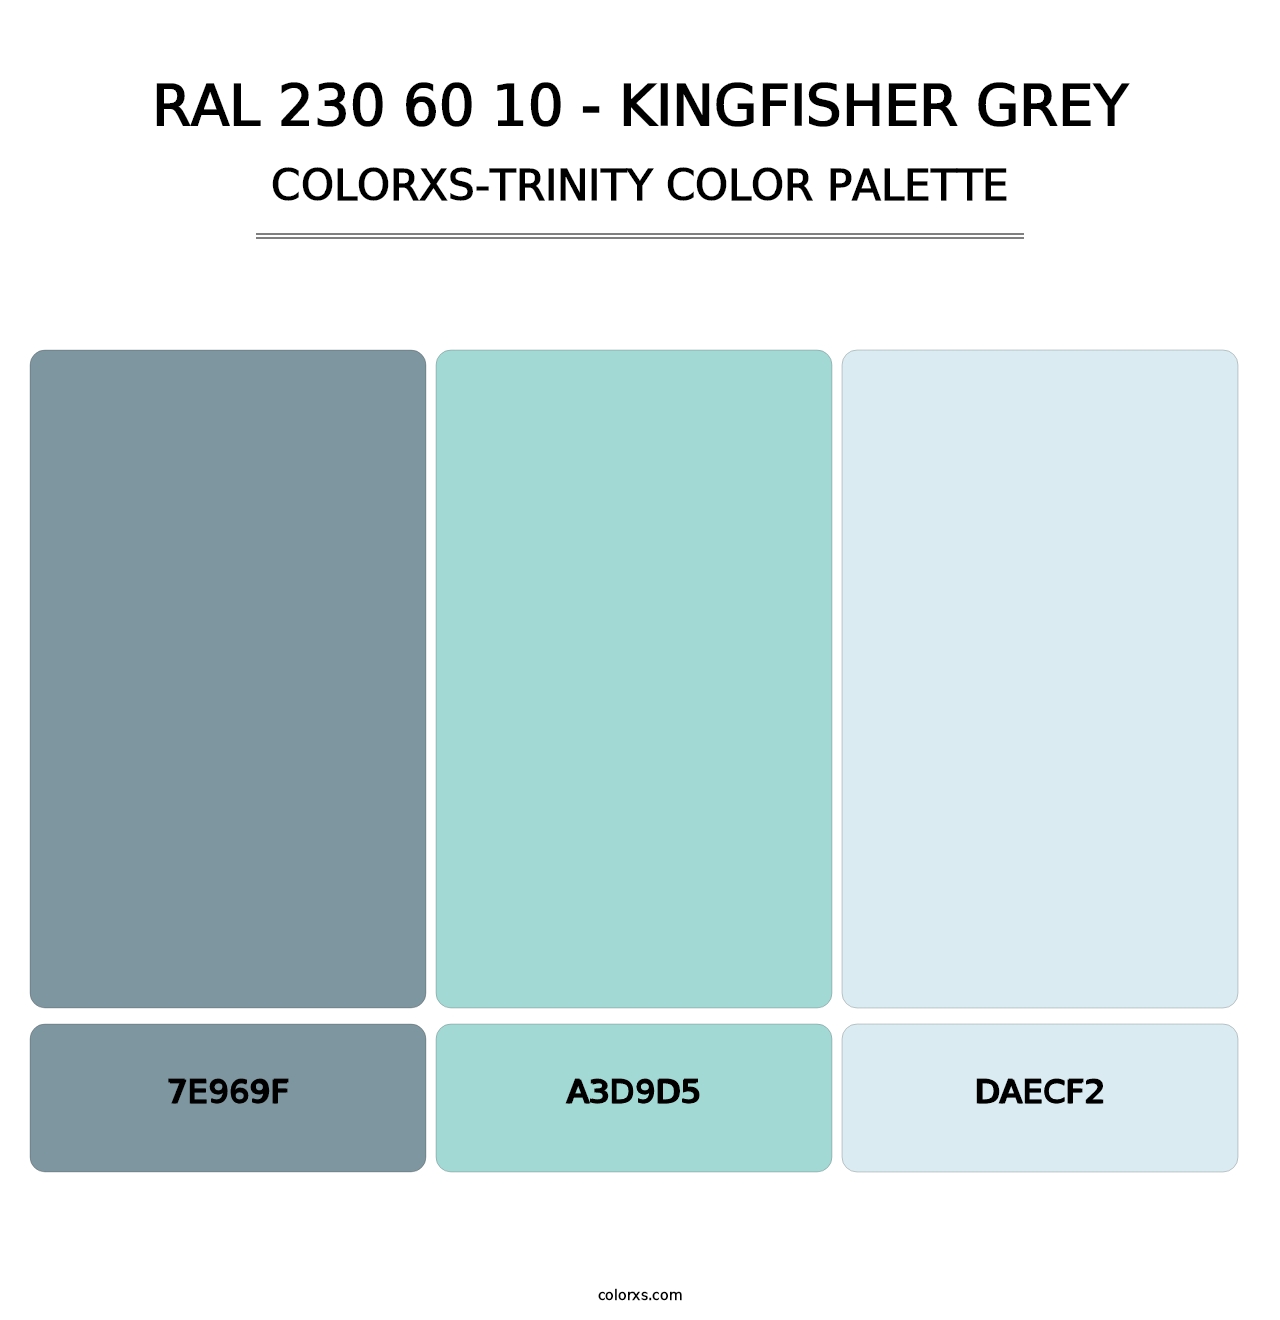 RAL 230 60 10 - Kingfisher Grey - Colorxs Trinity Palette